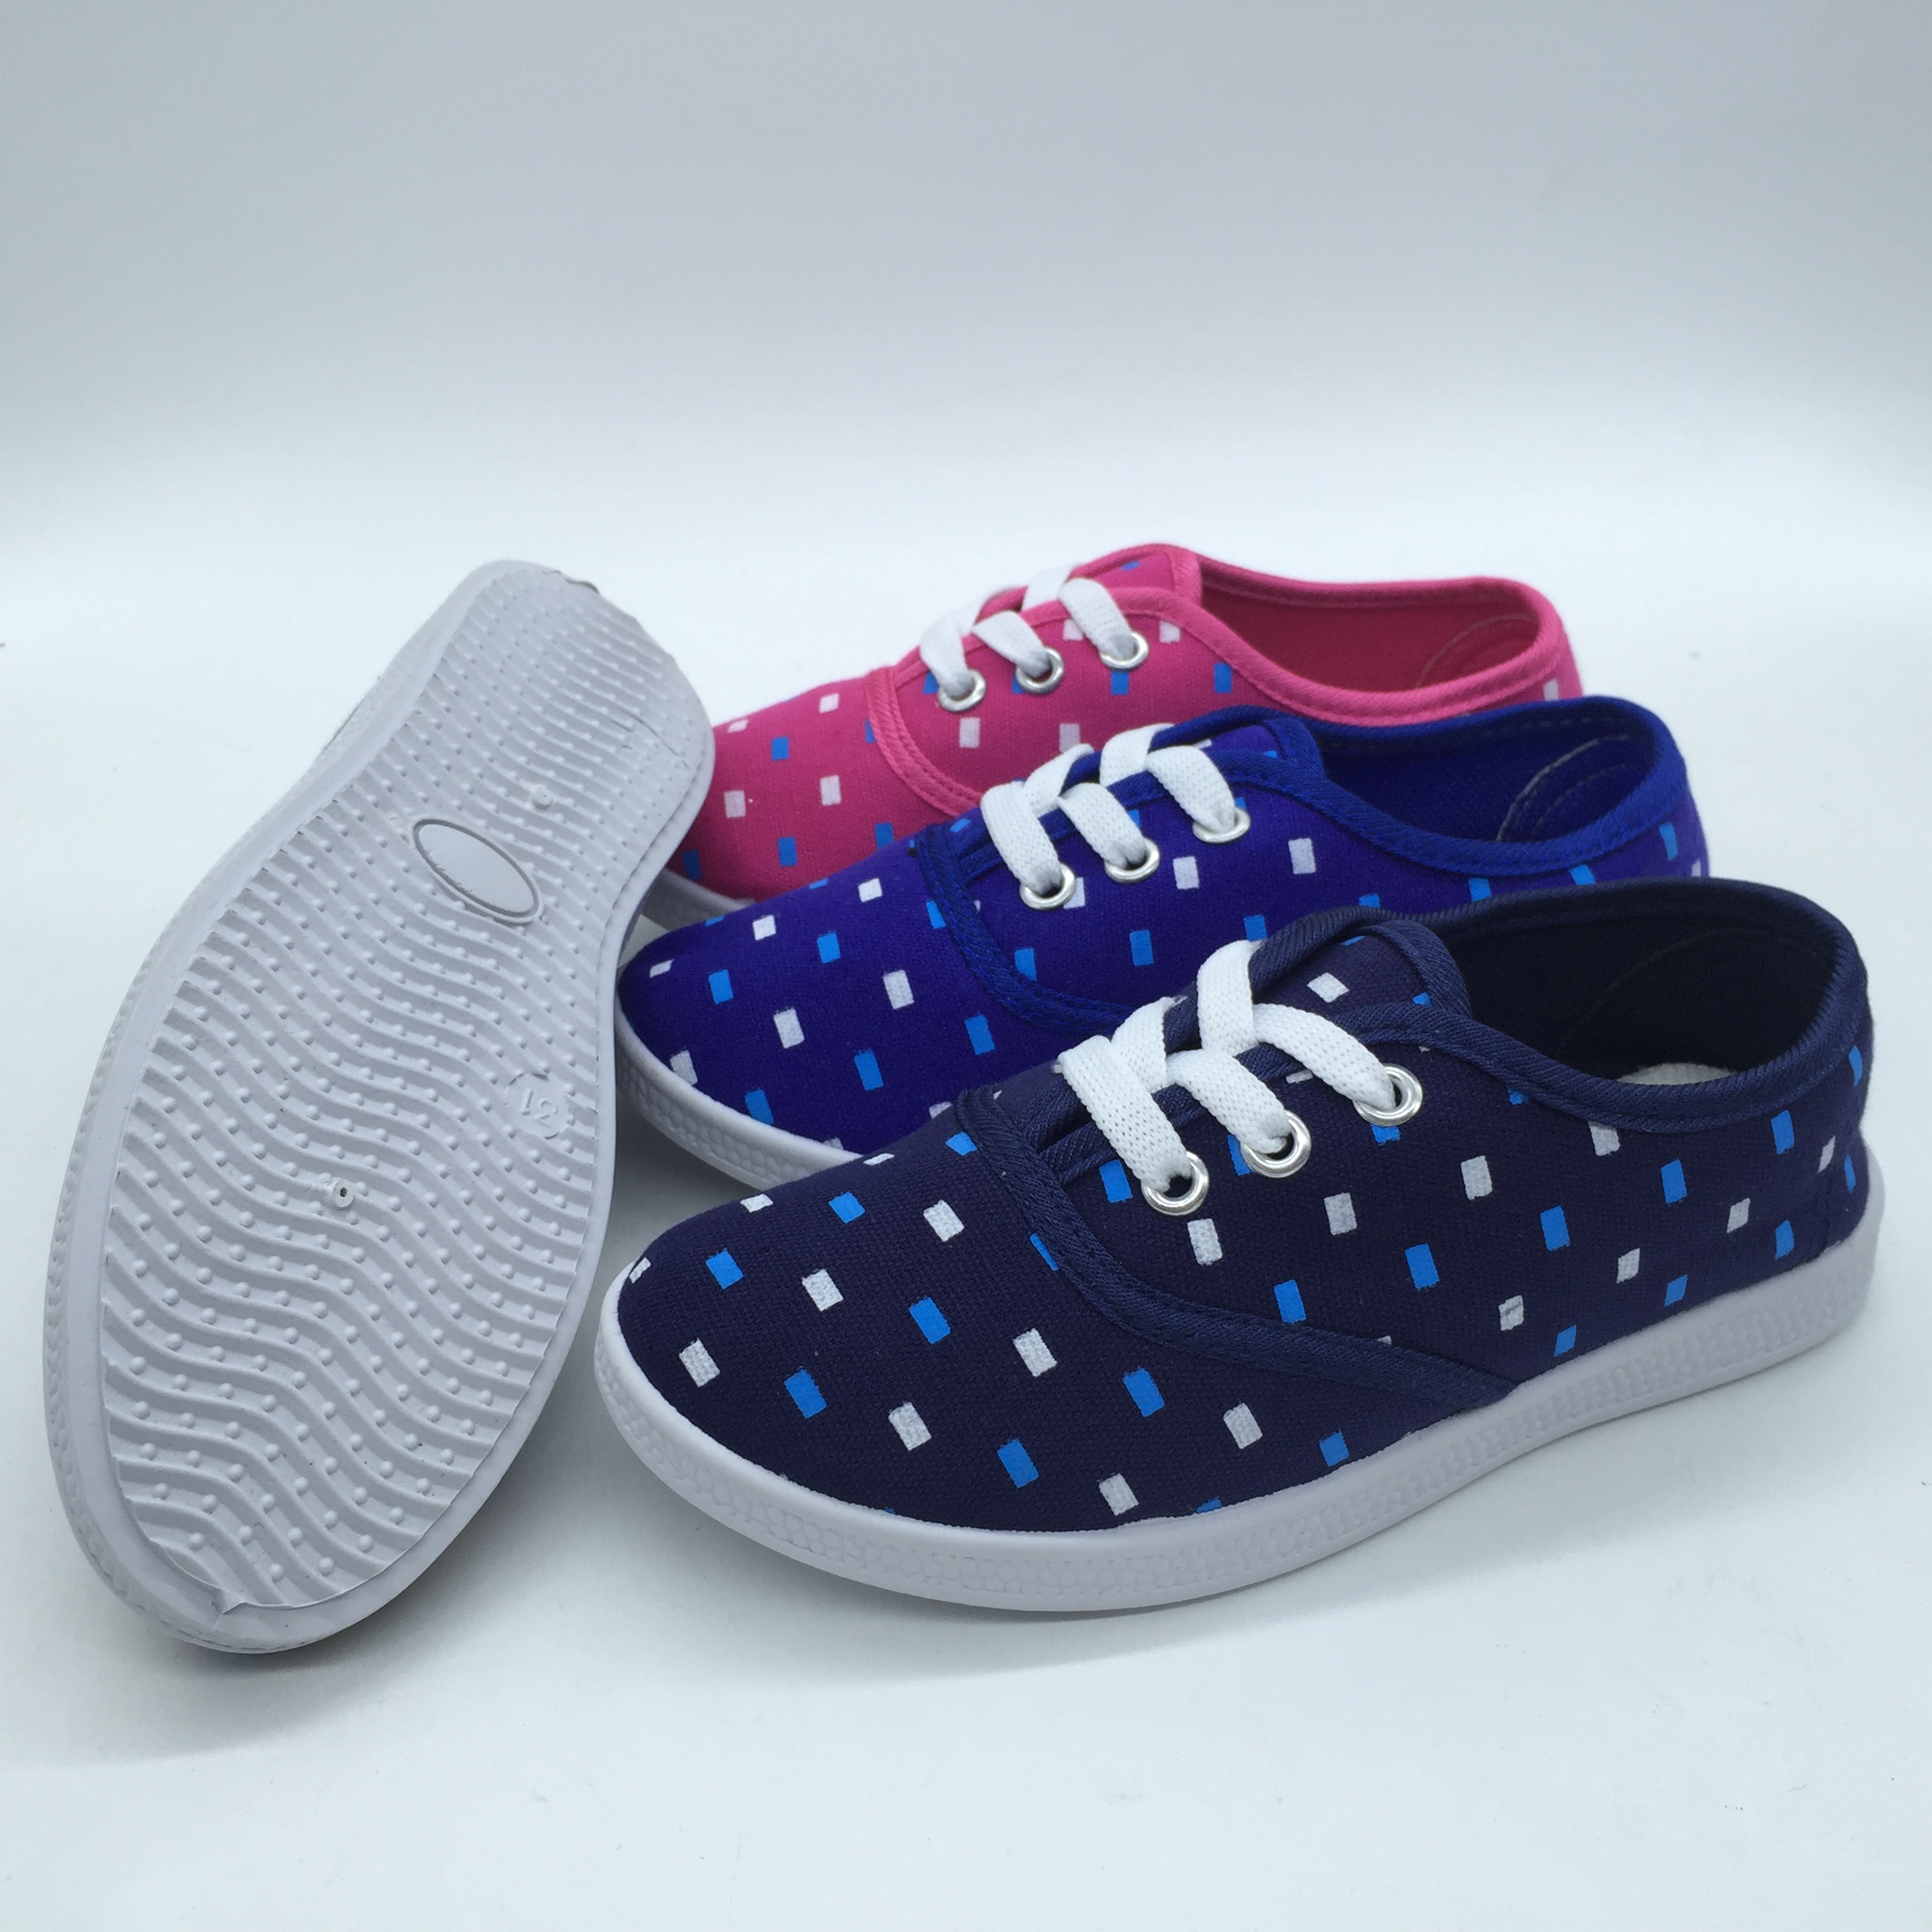 New style injection canvas shoes casual shoes (ZL0415-5) 1. ITEM...